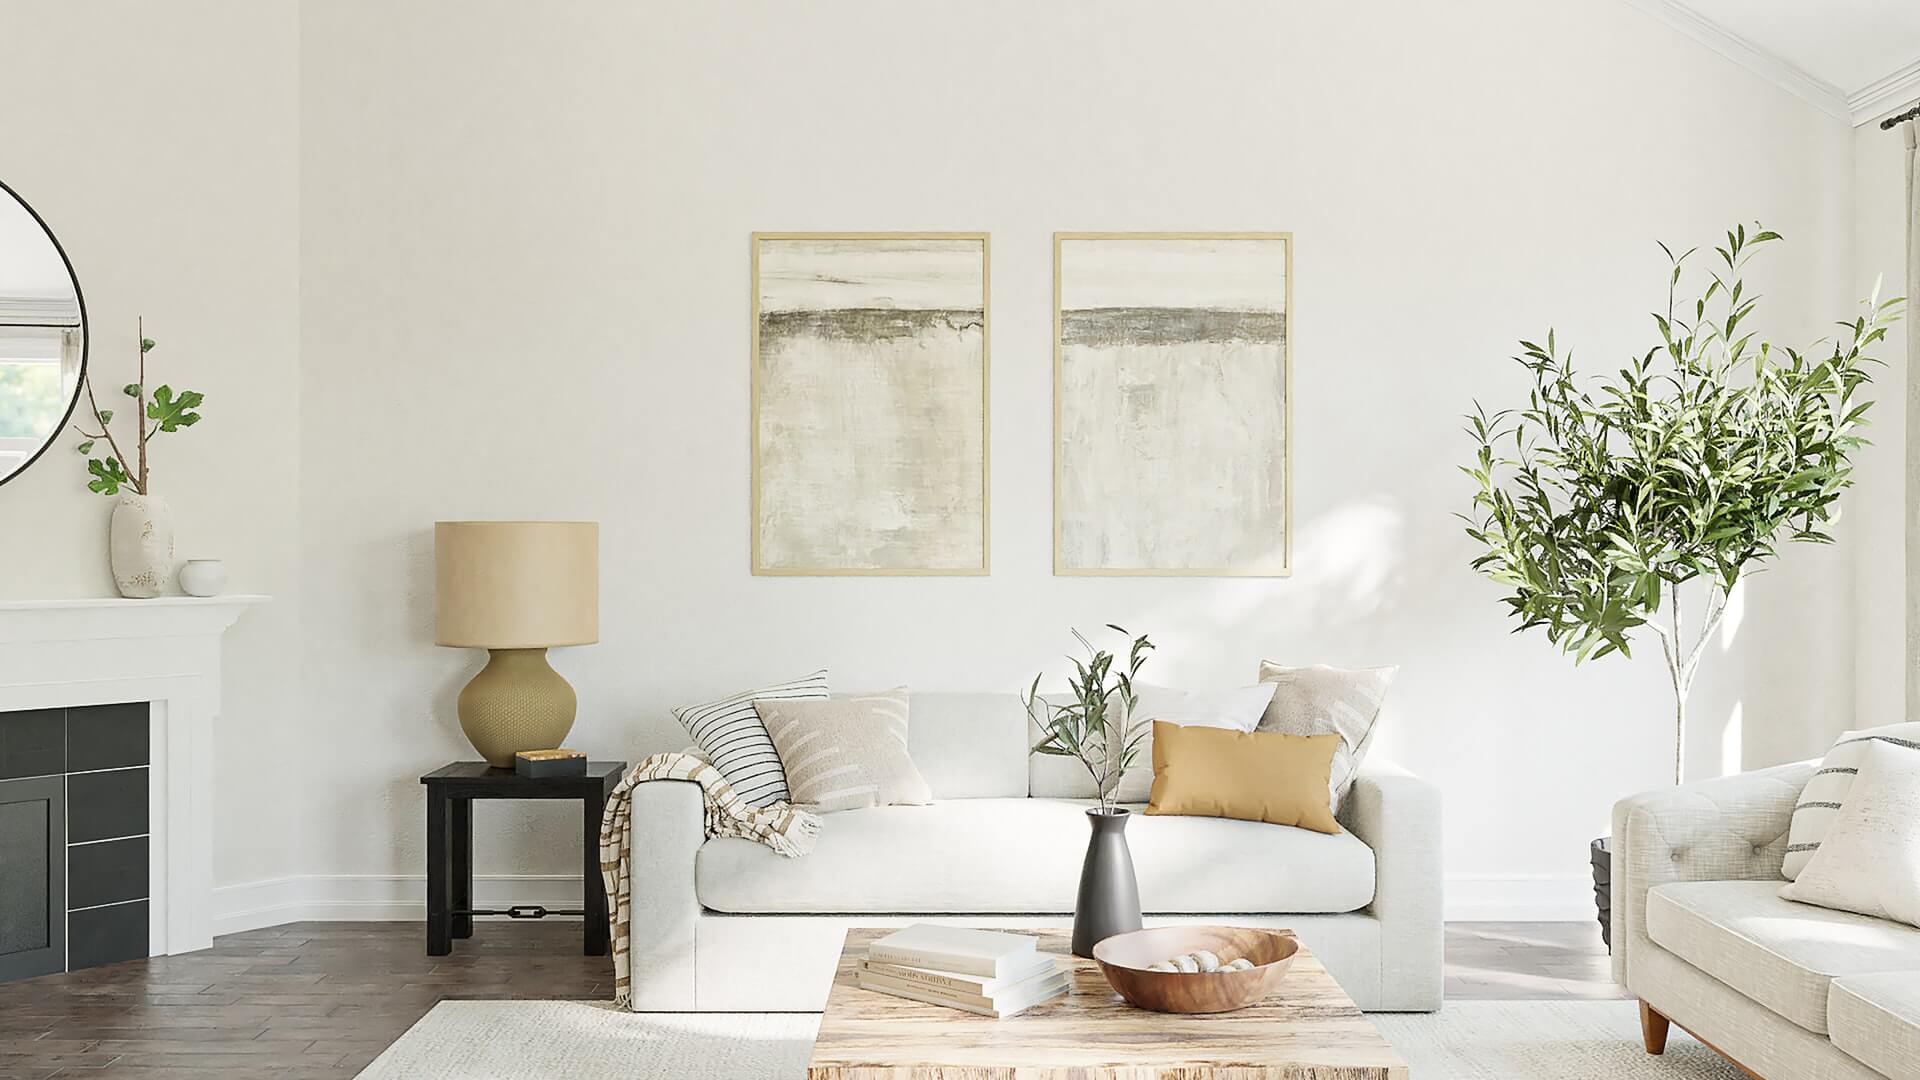 Where Should You Splurge on Your Living Room